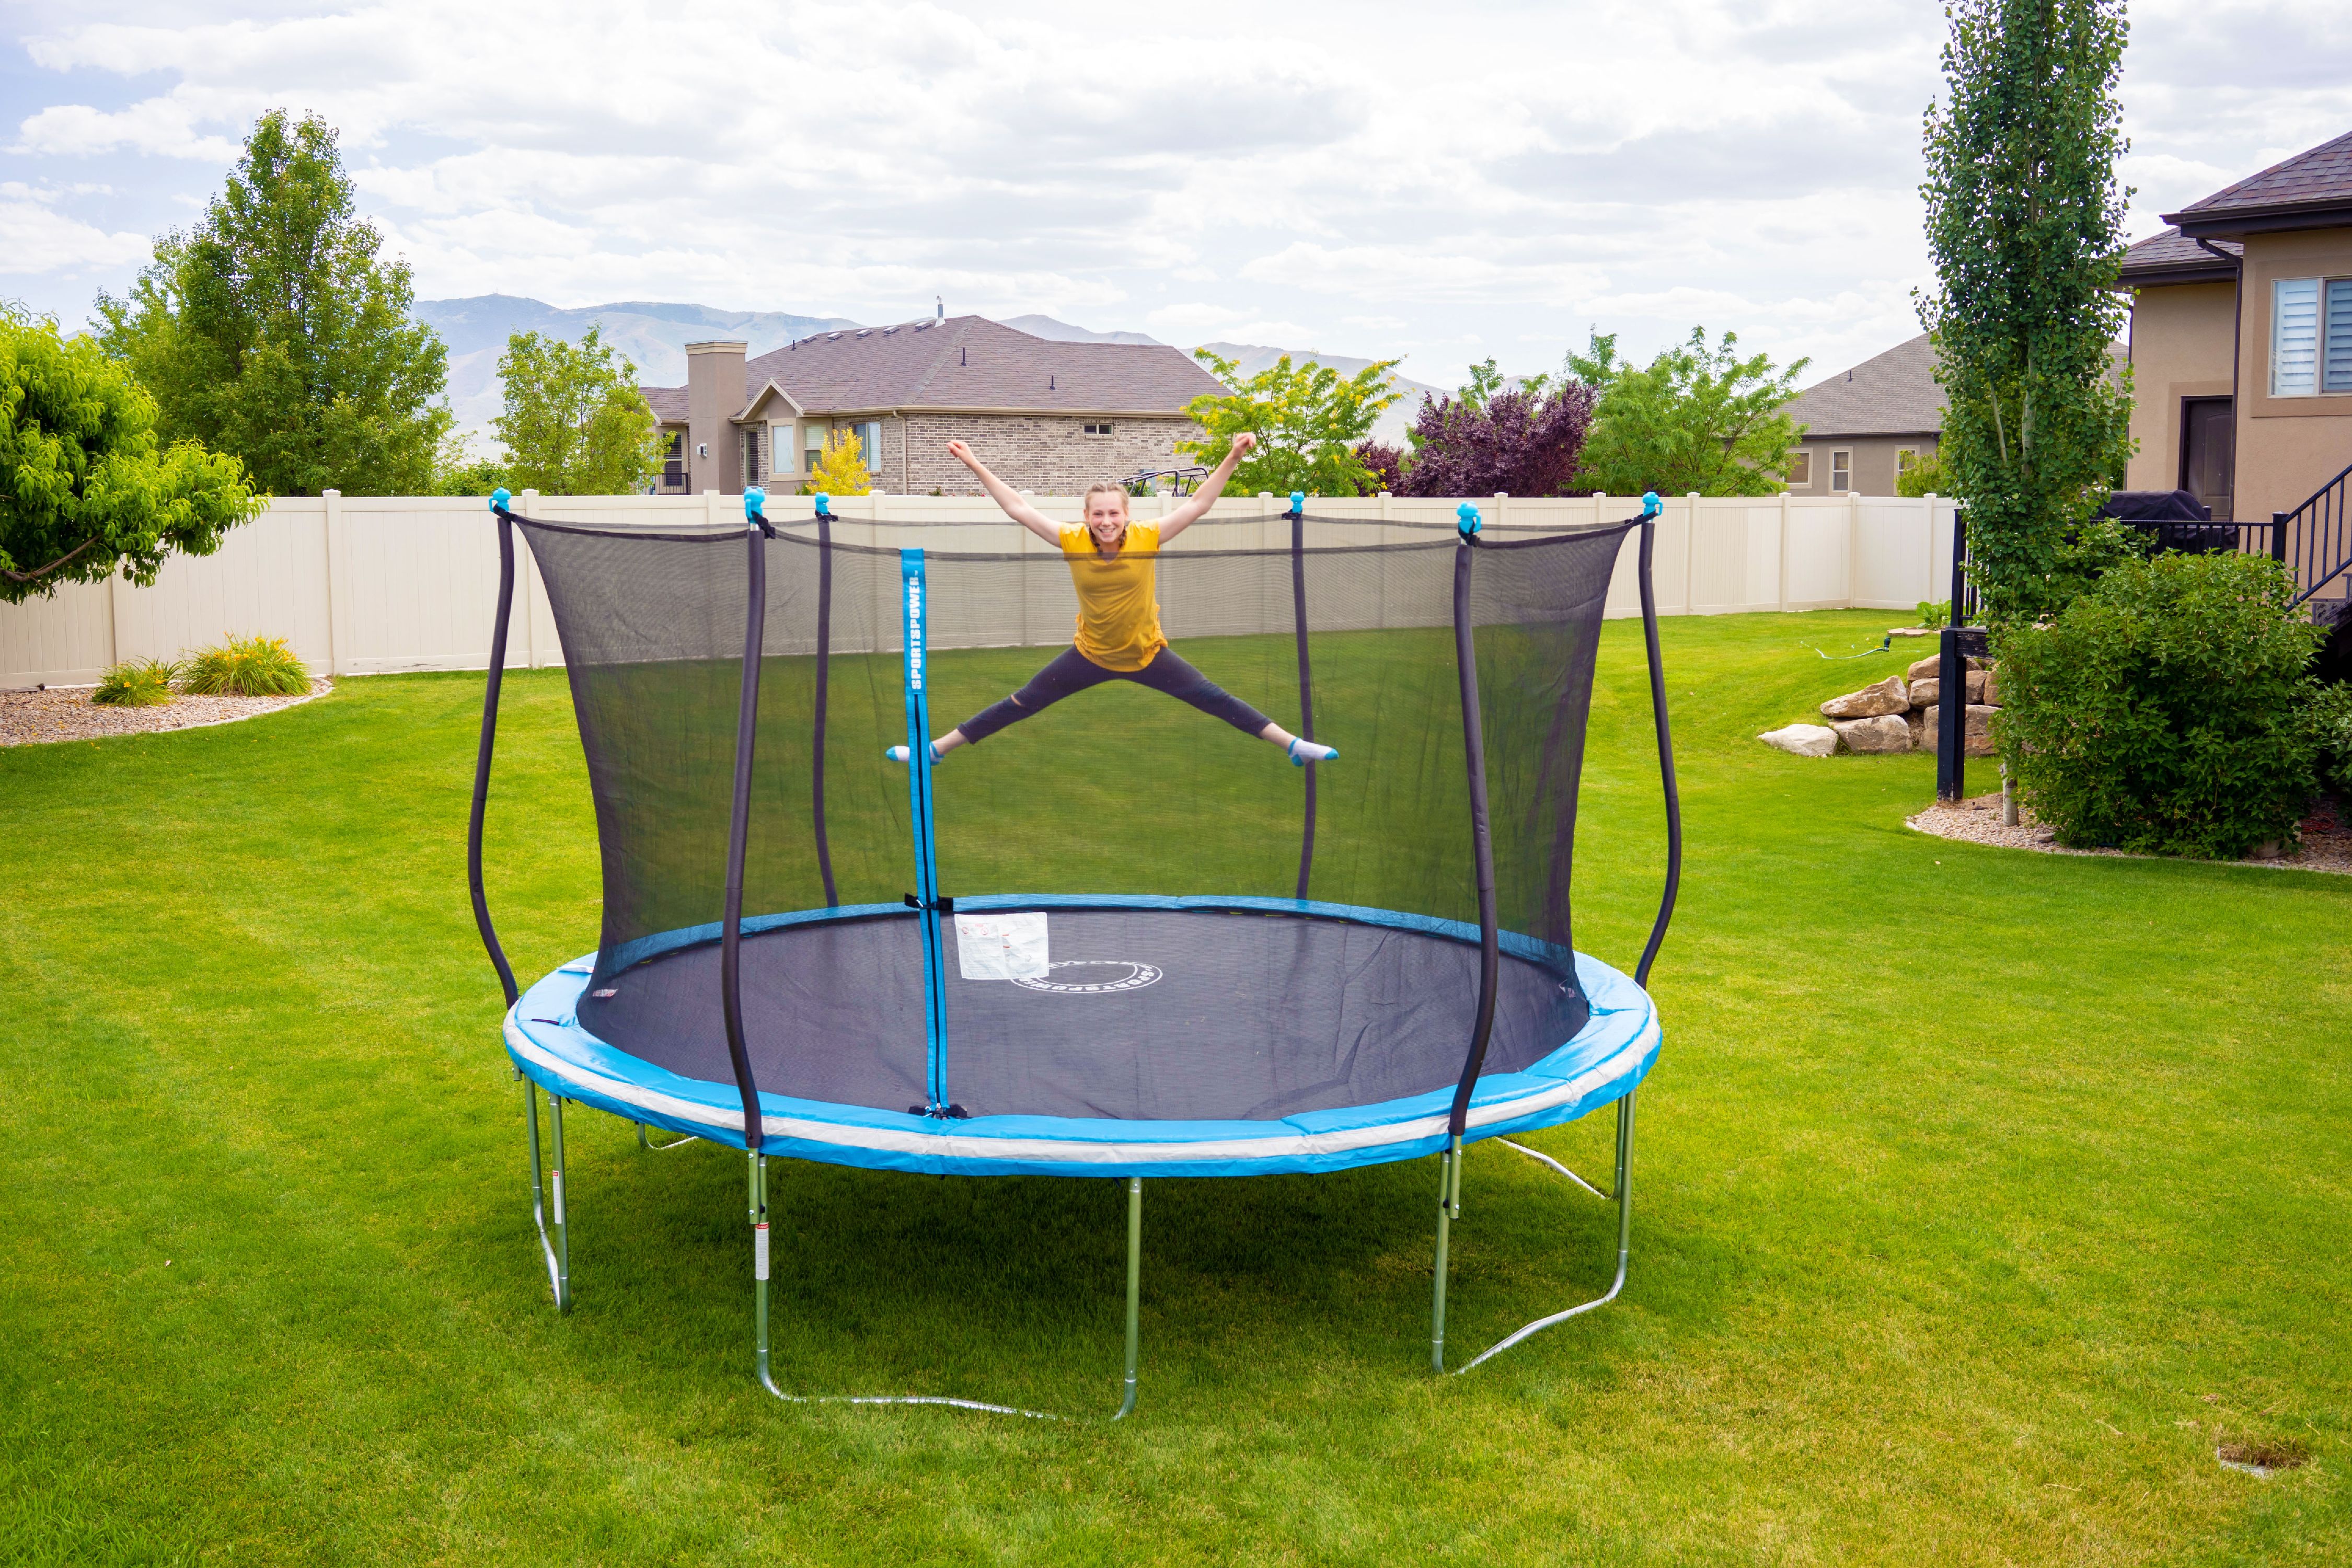 Bounce Pro 14' Trampoline, Classic Safety Enclosure, Blue - image 3 of 8